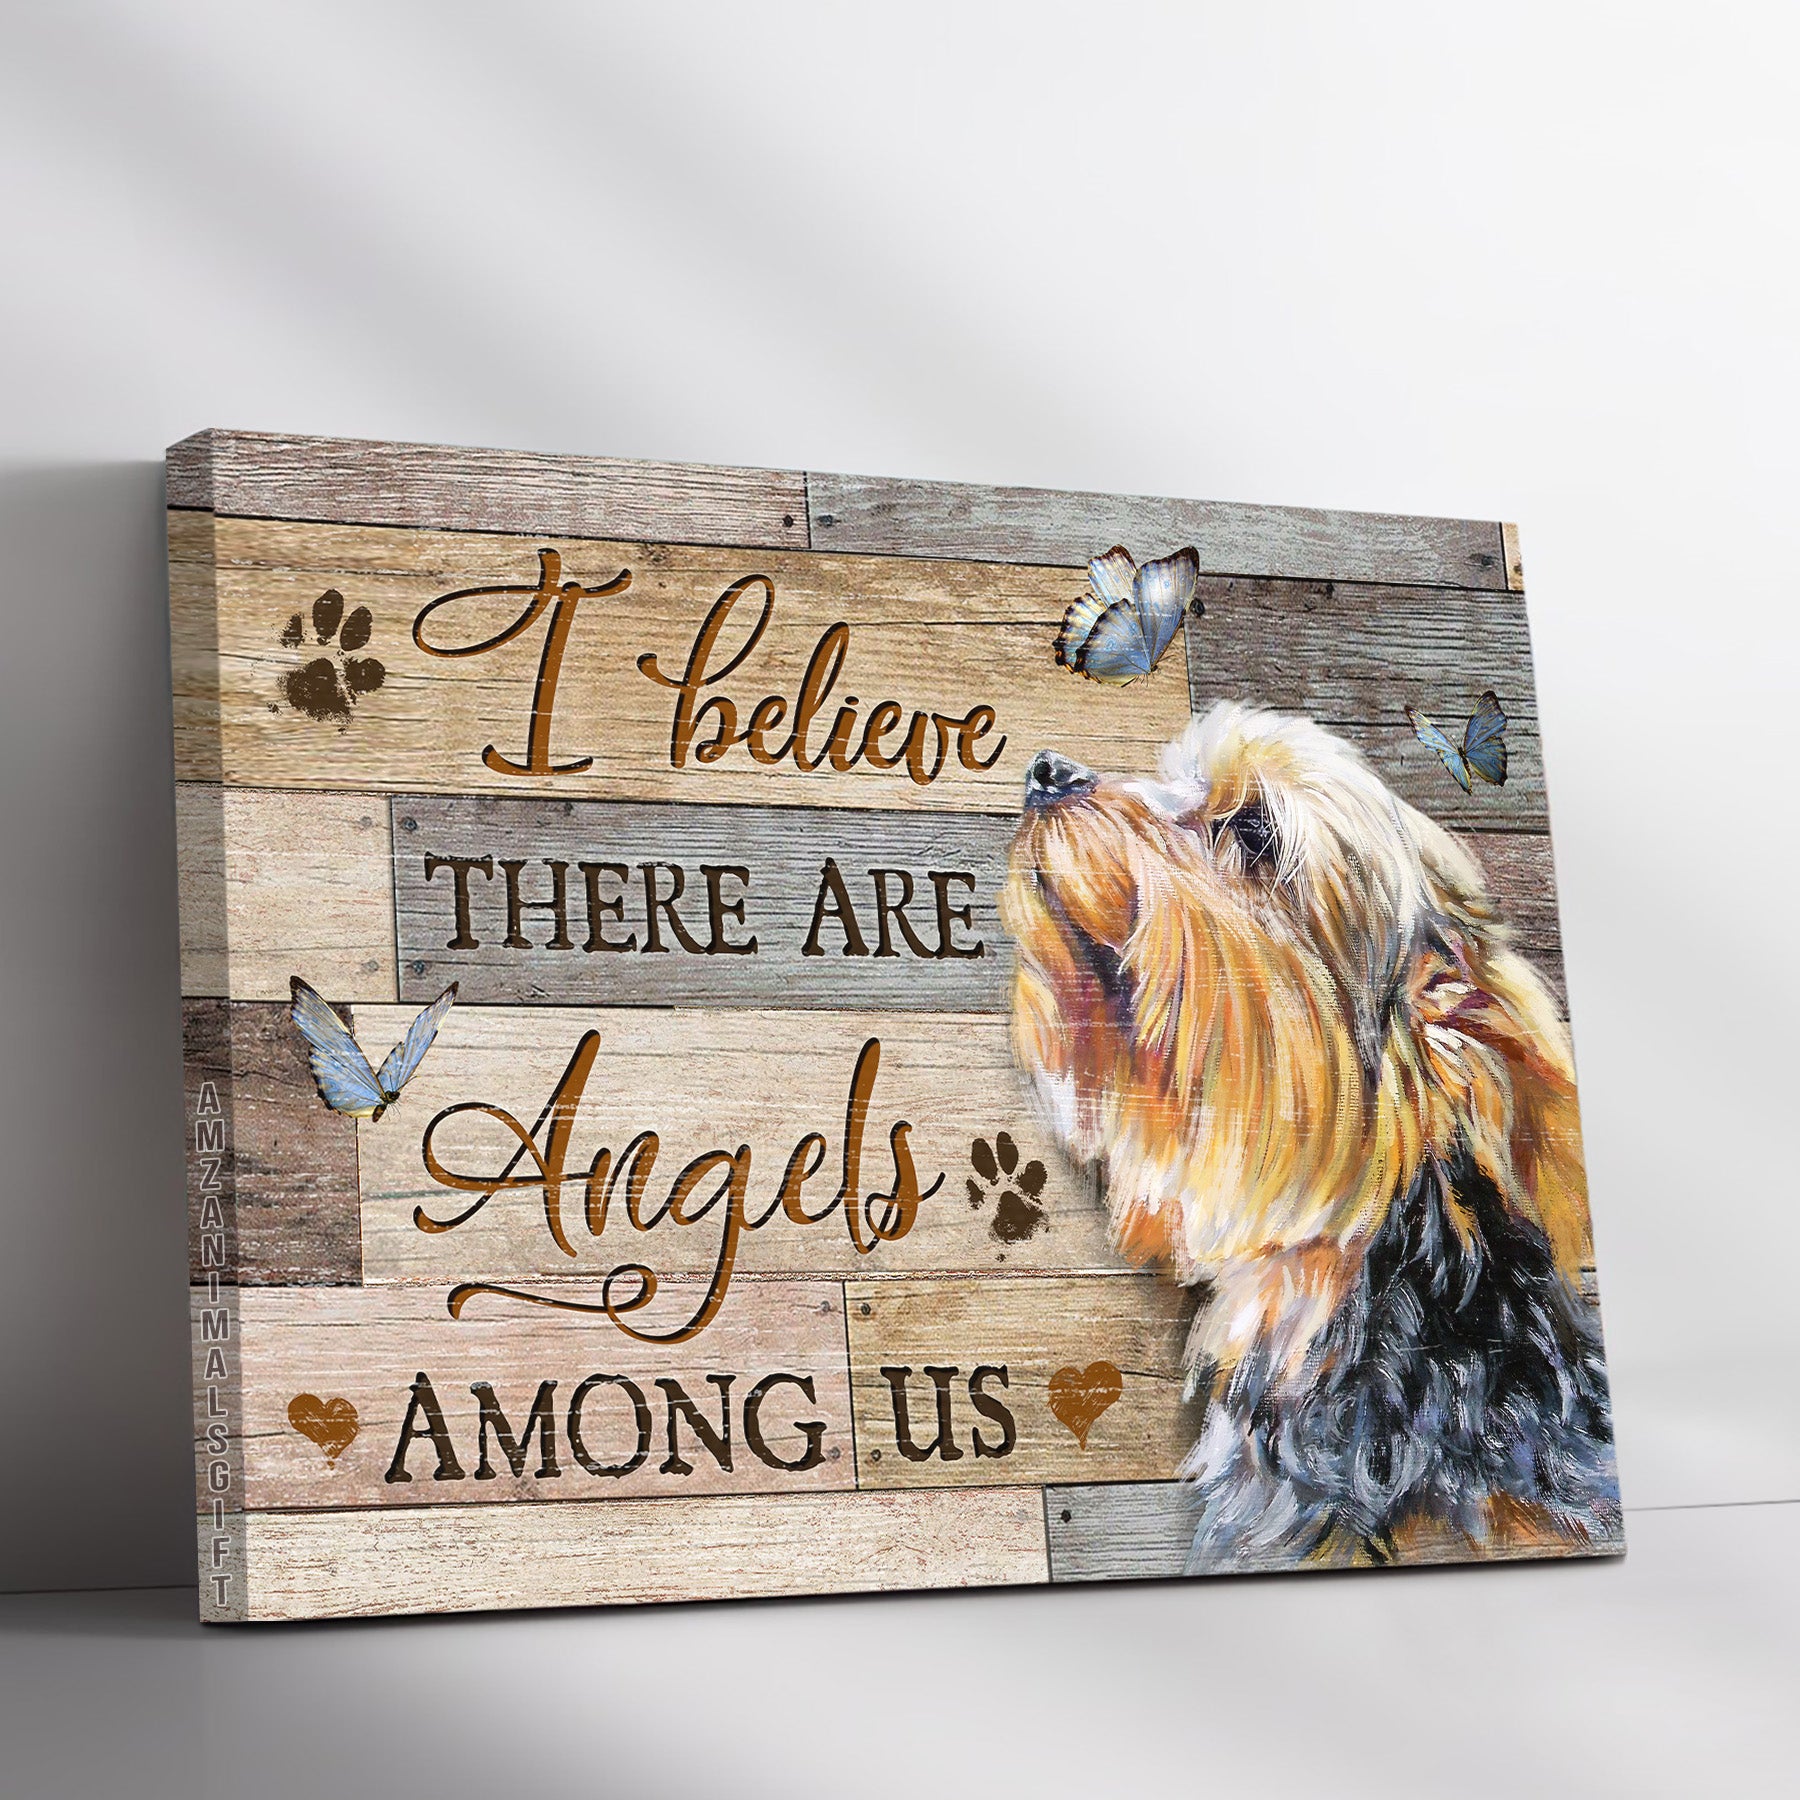 Yorkshire Terrier Landscape Canvas - Memorial Canvas - Adorable Yorkshire Terrier, Lovely butterfly Canvas - I believe there are angels among us Canvas - Gift For Dog Lovers, Friends, Family